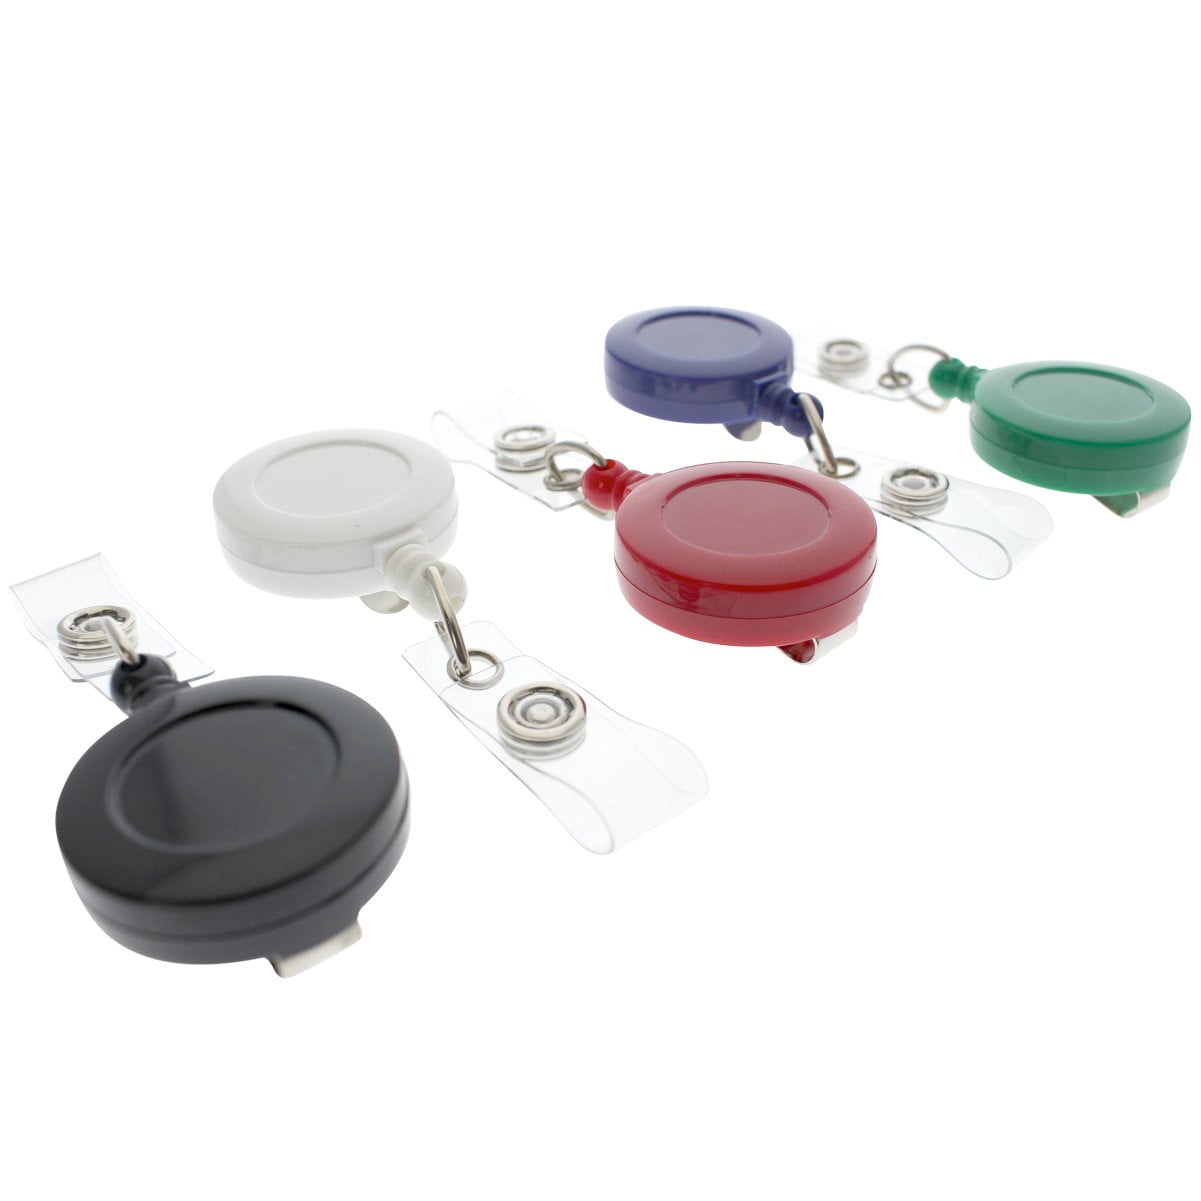 25 Pack - Premium Retractable ID & Key-Card Badge Reels with